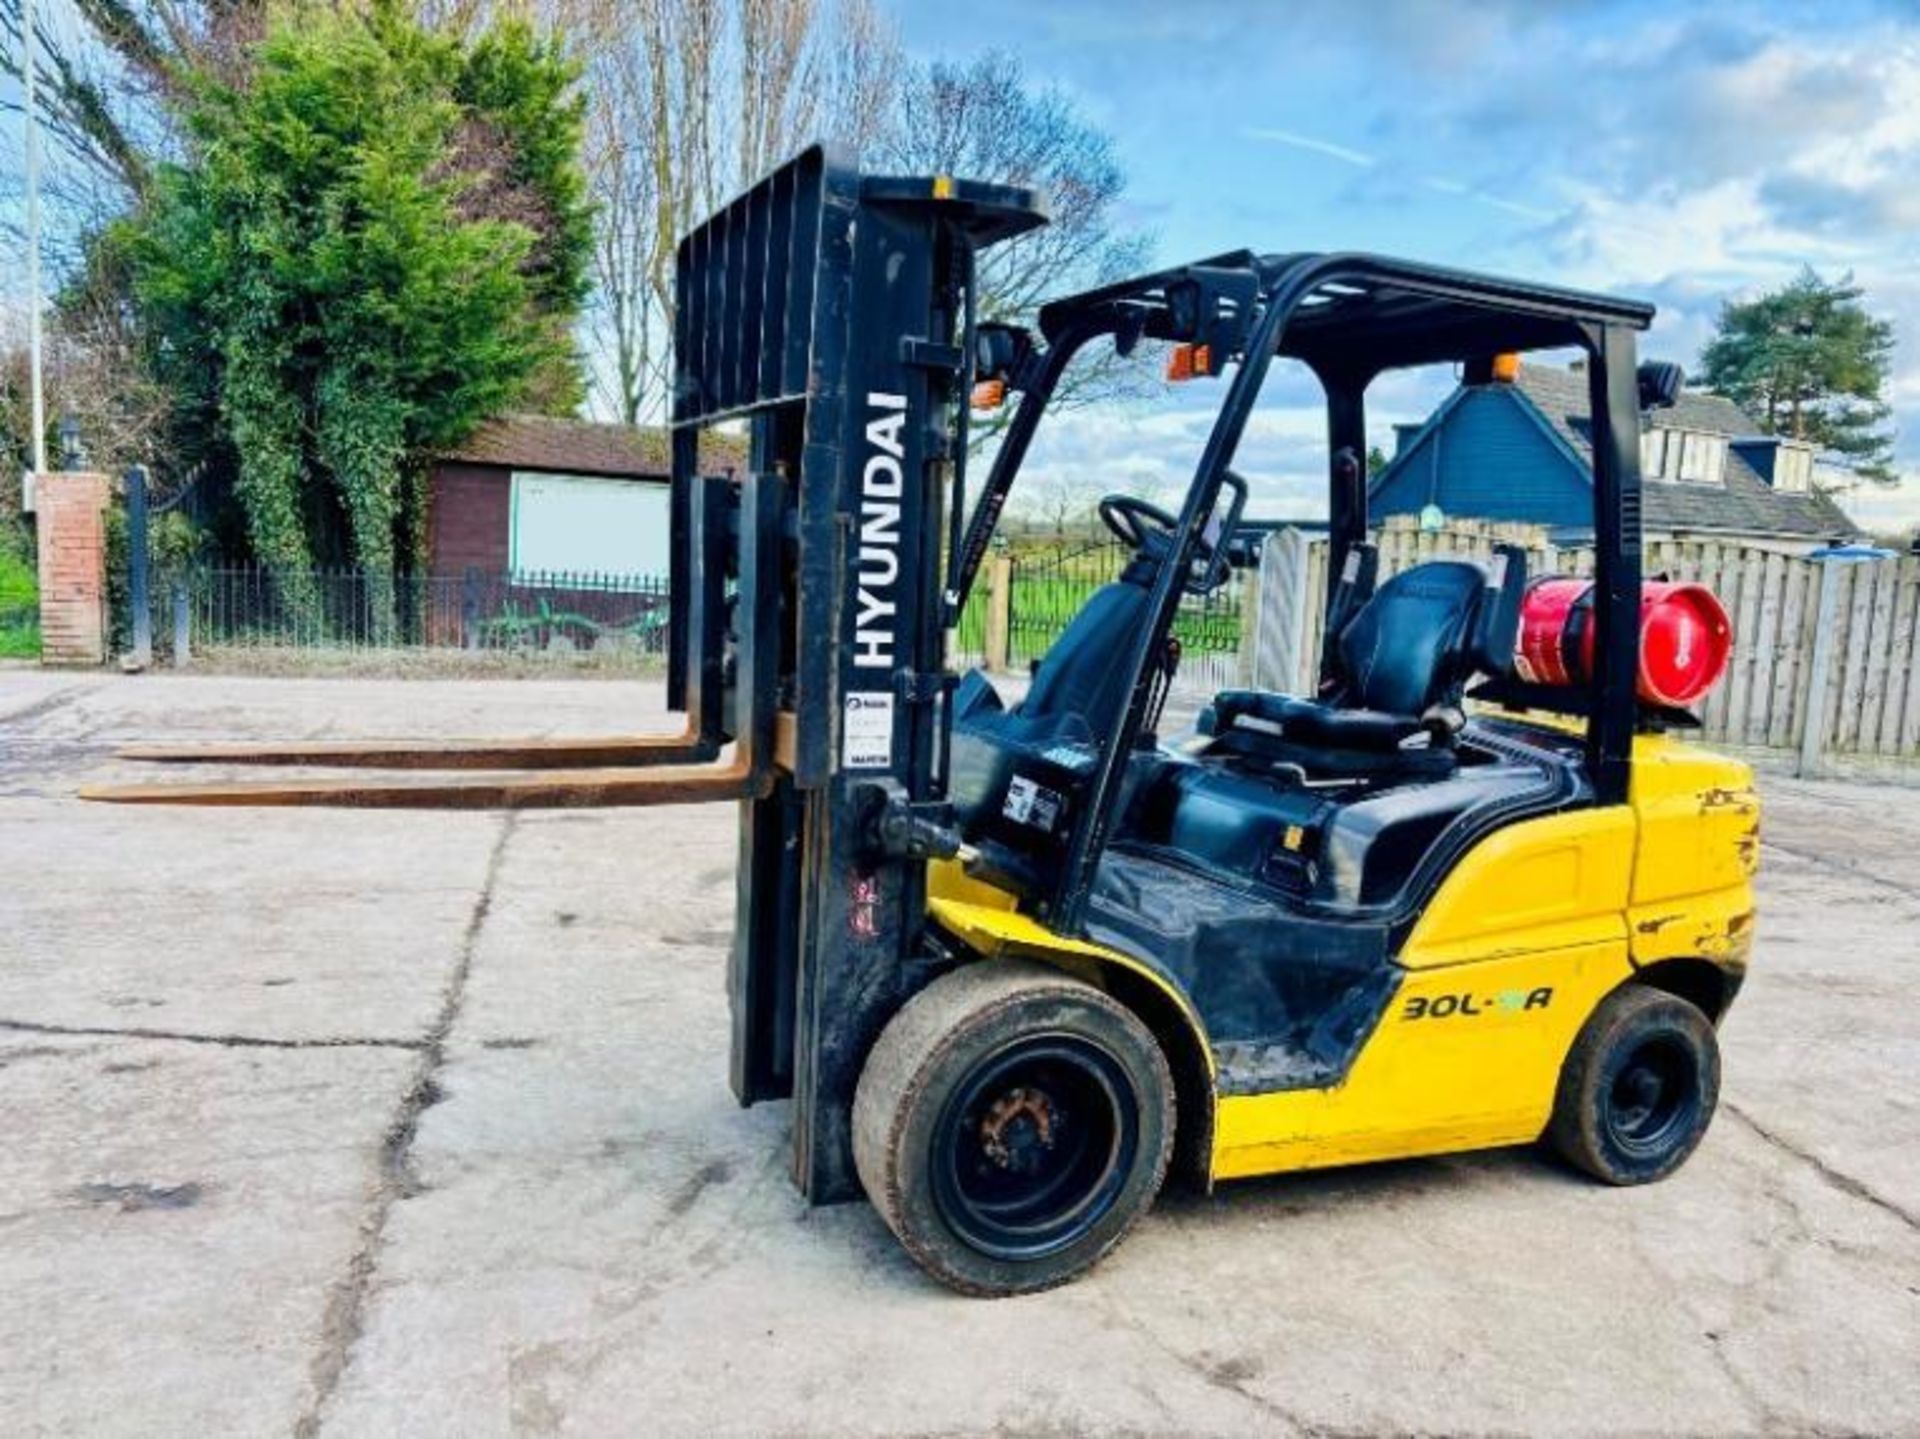 HYUNDAI 25L-9A CONTAINER SPEC FORKLIFT *YEAR 2017, 2956 HOURS* C/W SIDE SHIFT - Image 13 of 16